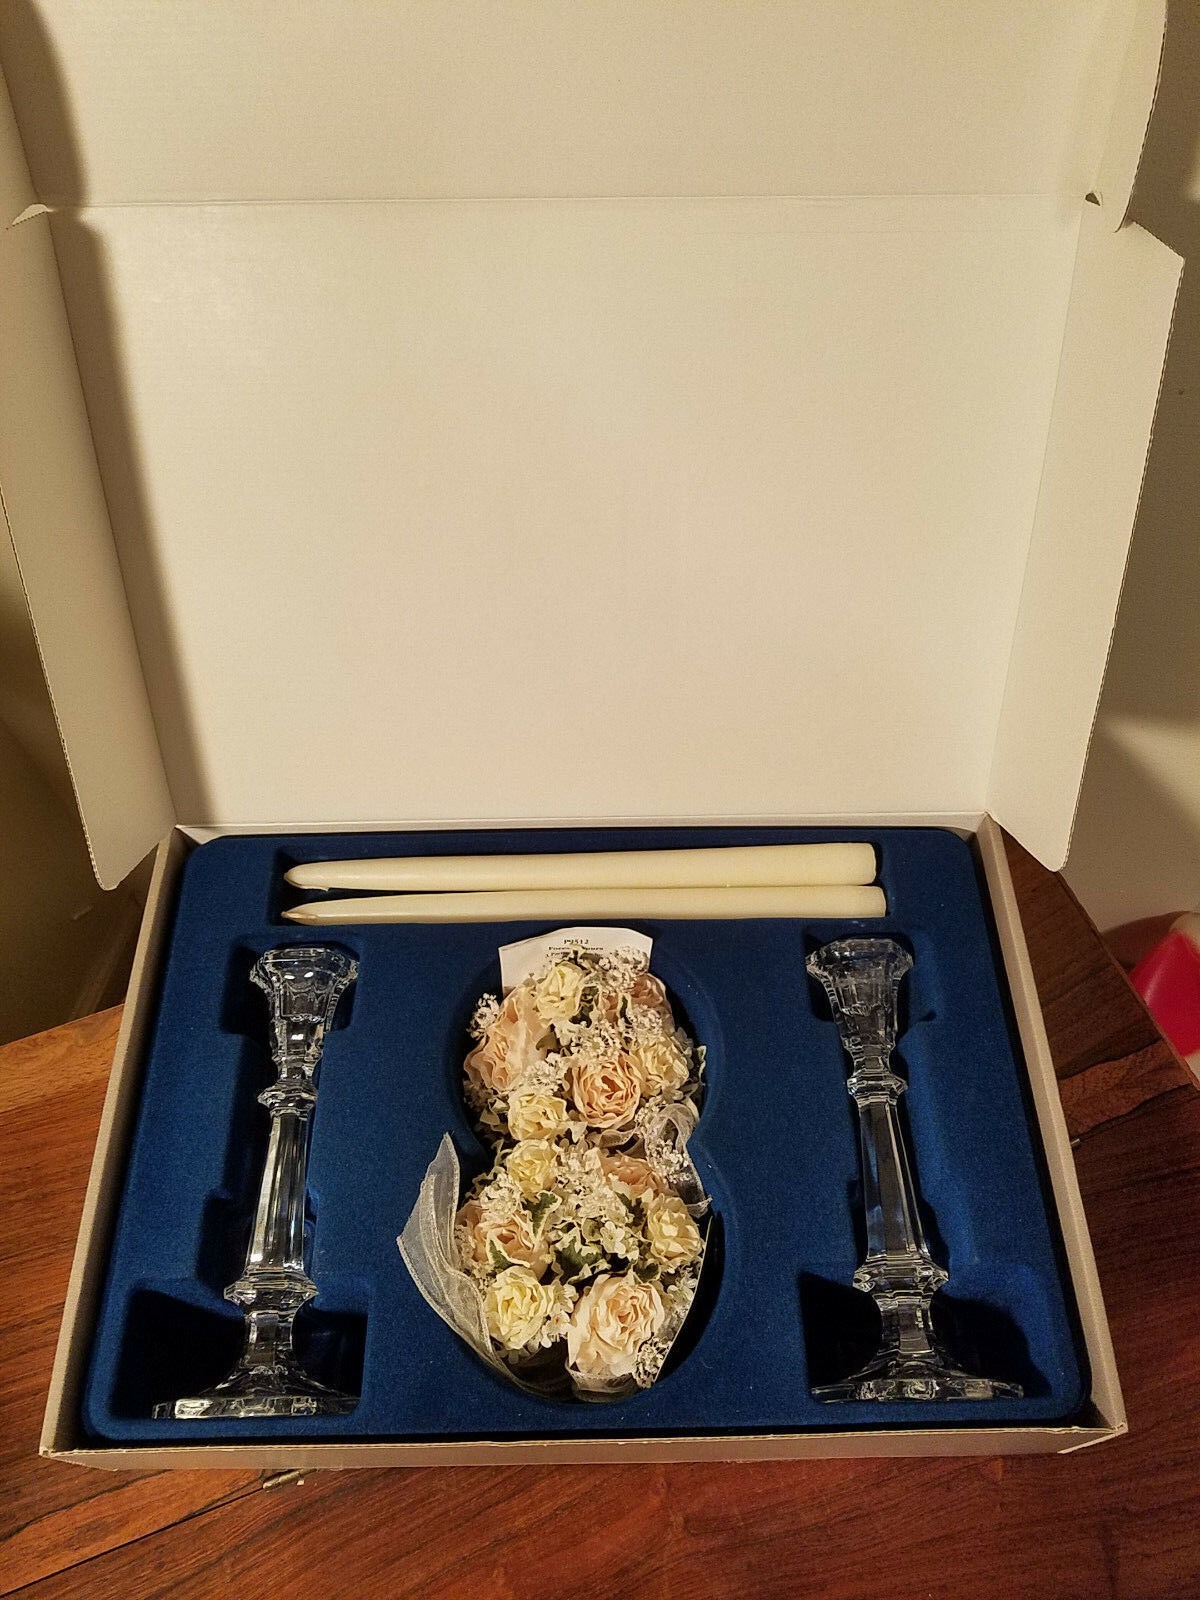 Partylite P9512 "Forever Yours" Crystal Candlestick Holders w/Floral Rings (NEW) - $30.64